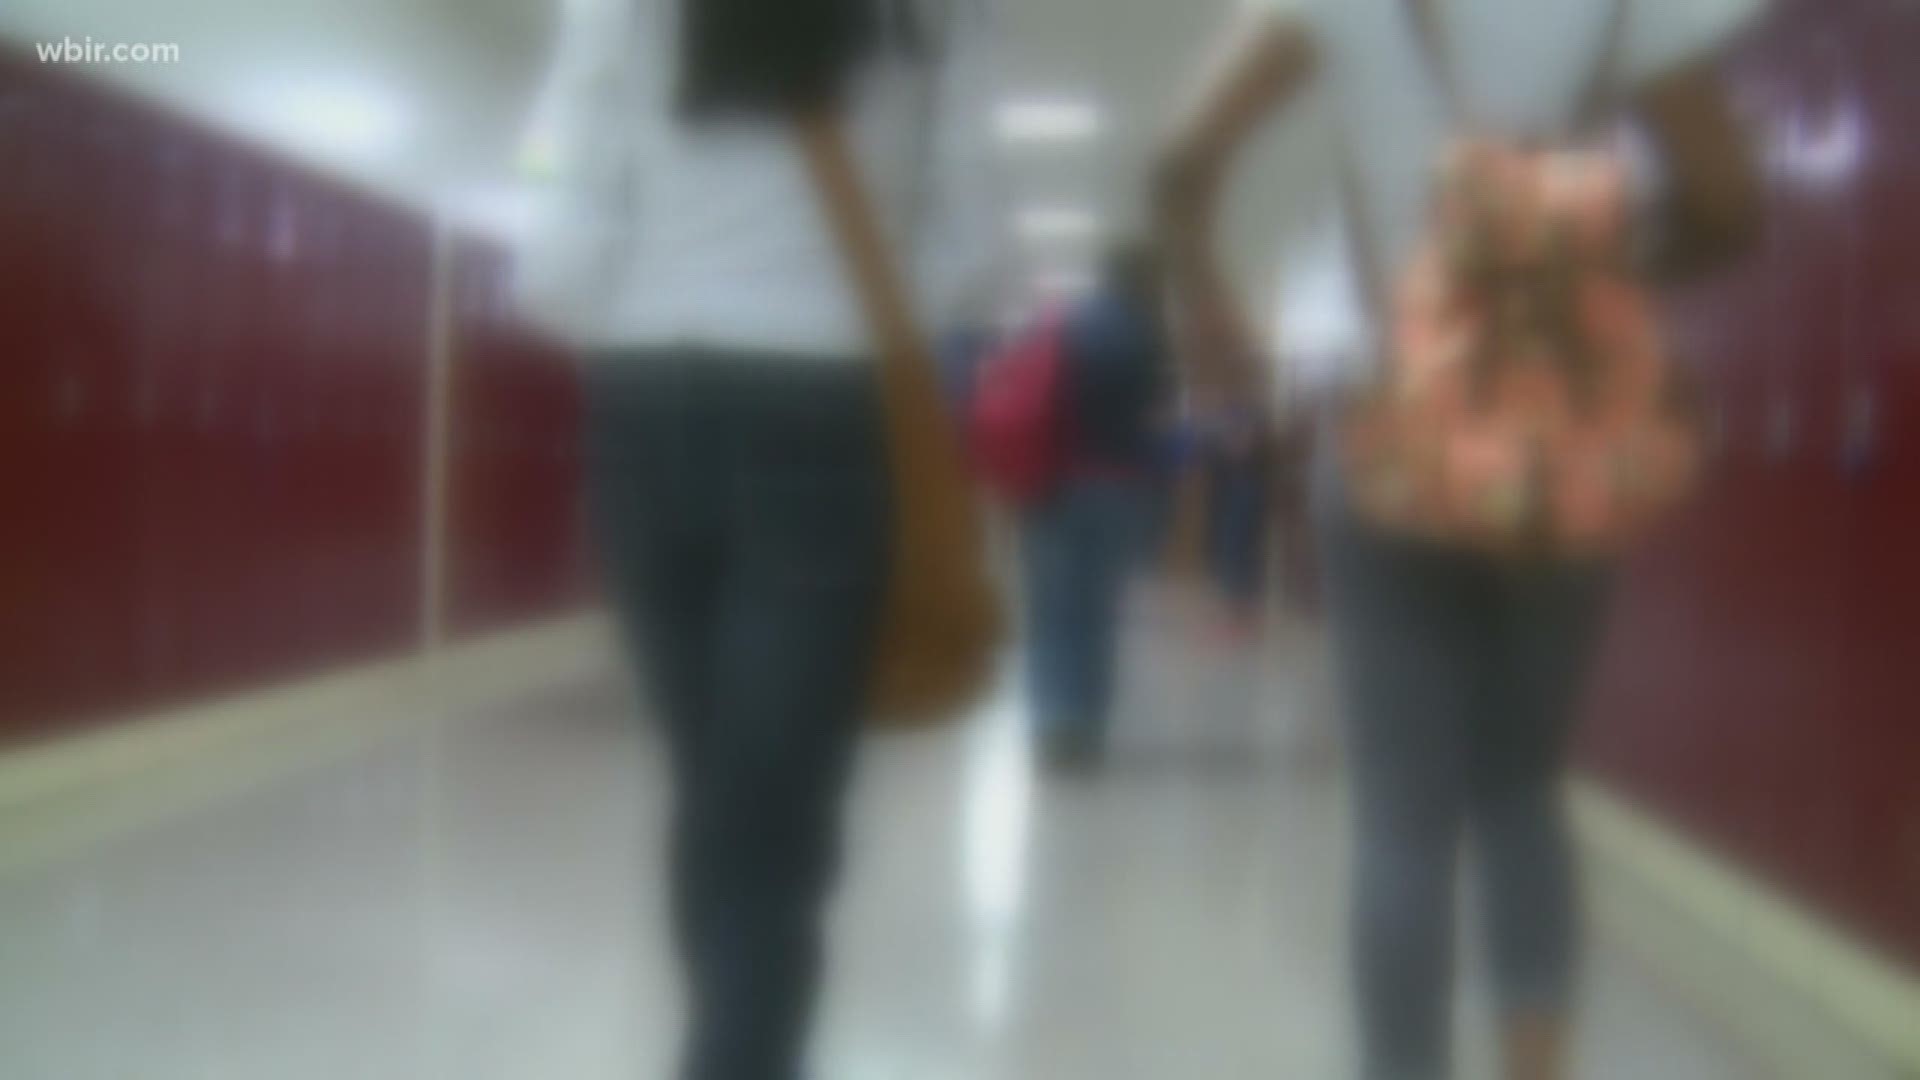 Experts: 'Tattletale problem' is changing bullying culture | wbir.com